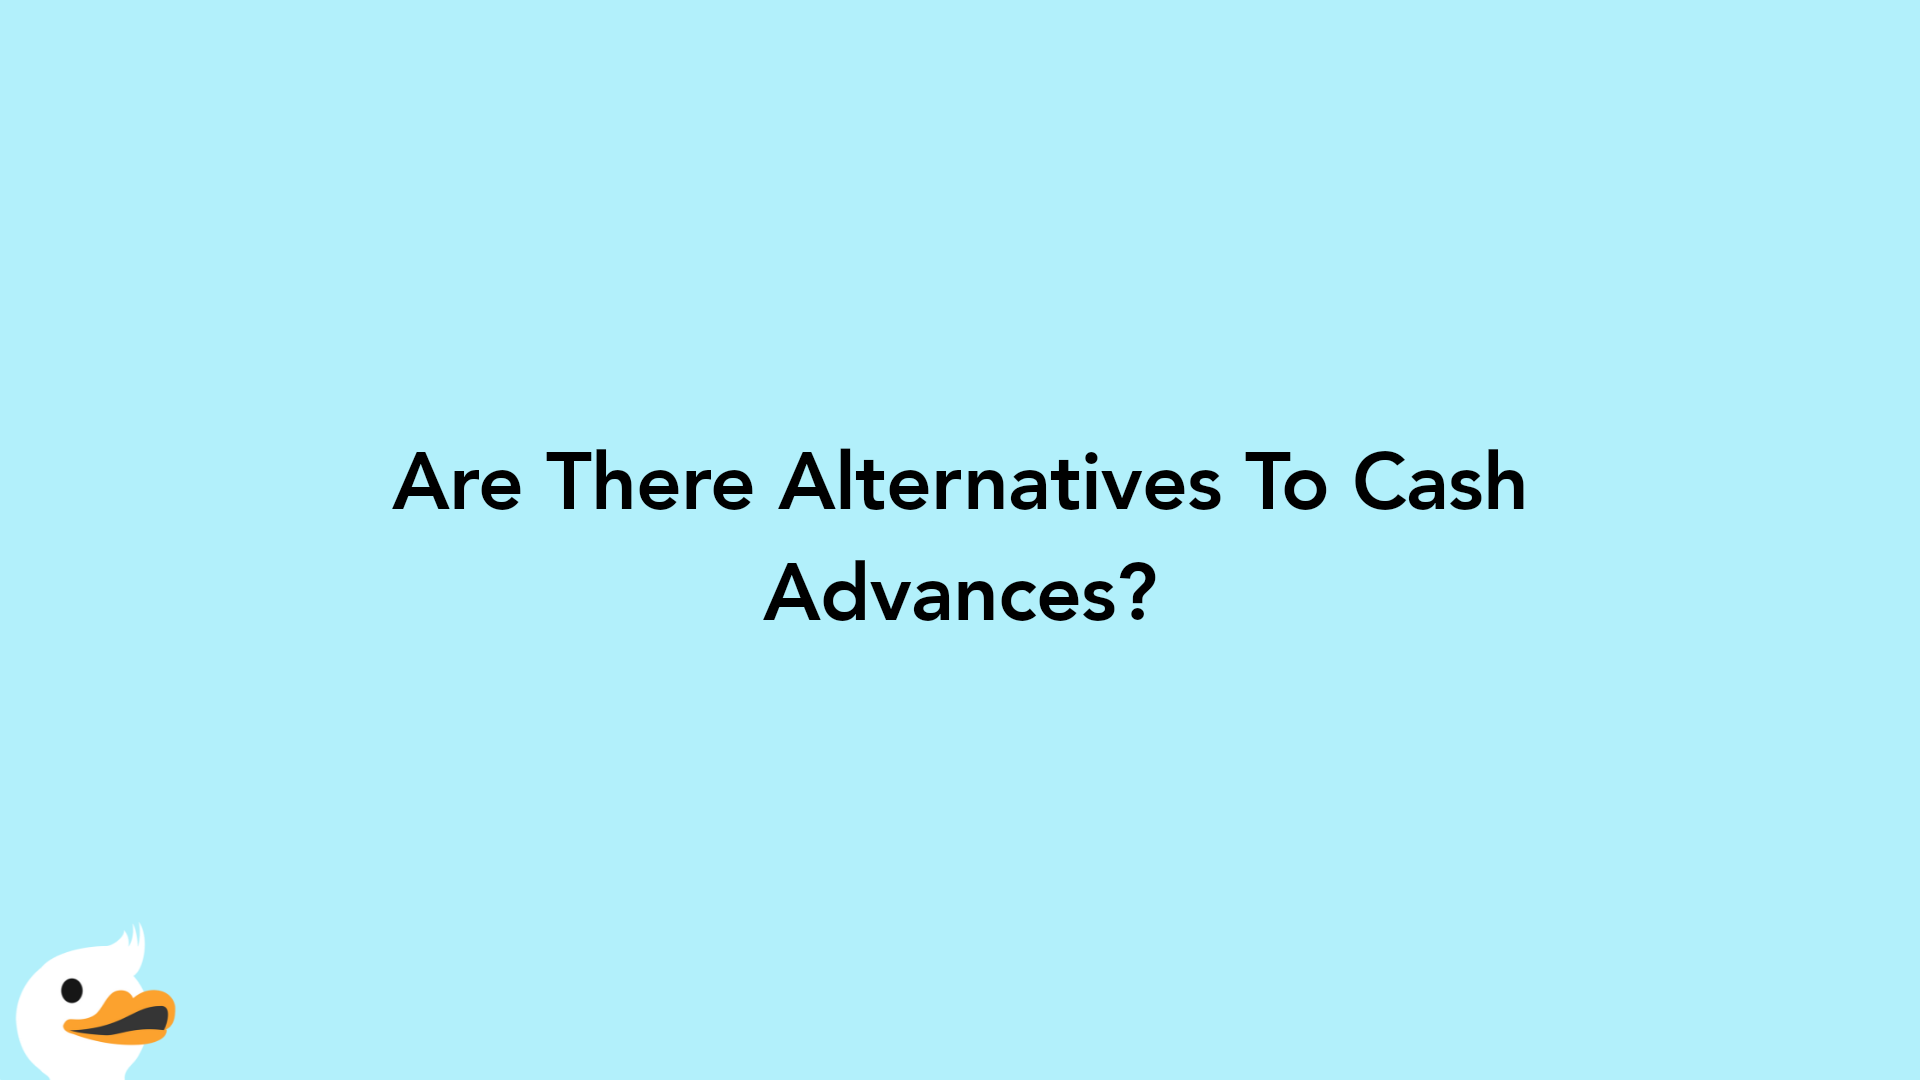 Are There Alternatives To Cash Advances?